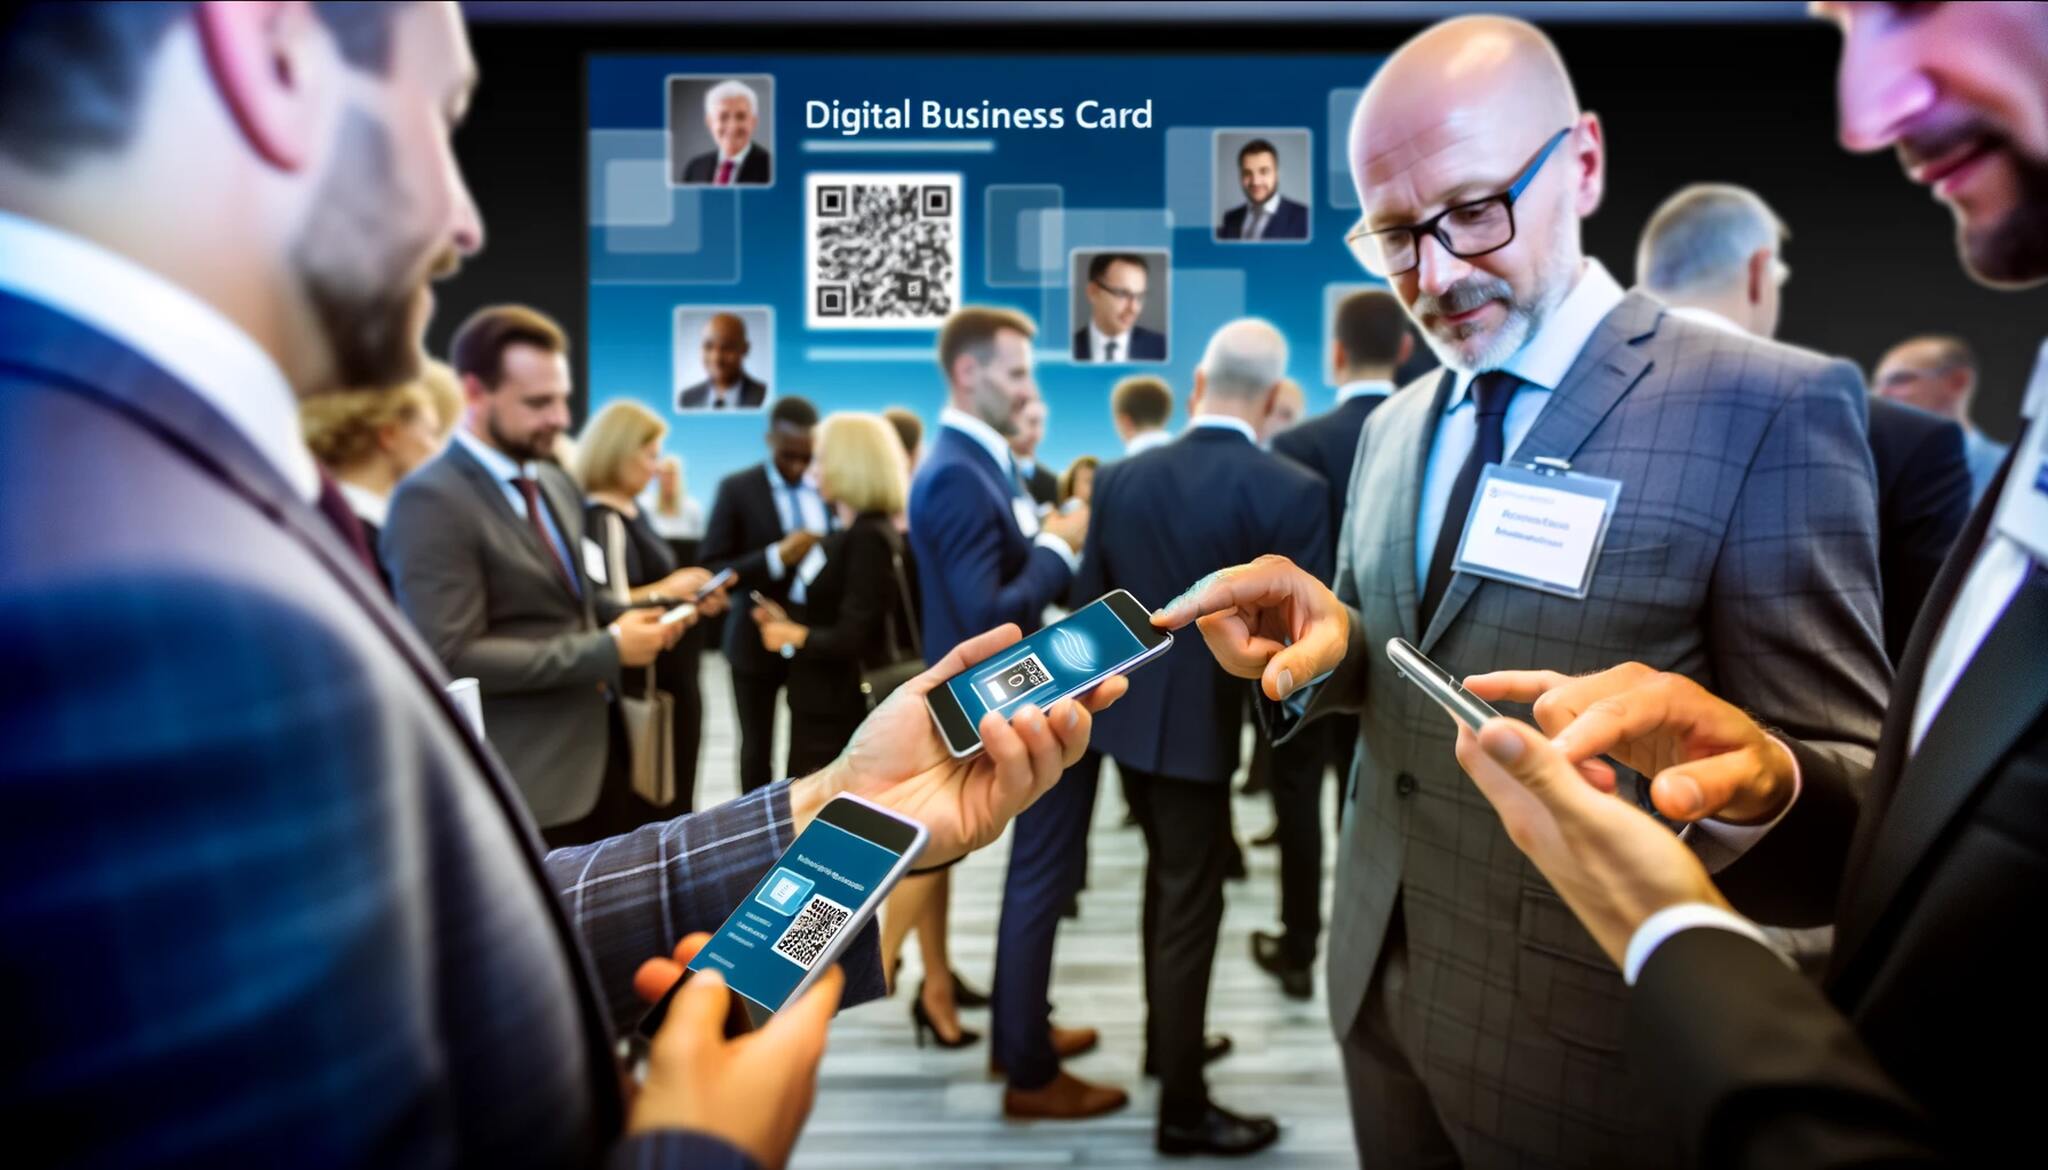  A networking event with professionals mingling and sharing digital business cards using their smartphones